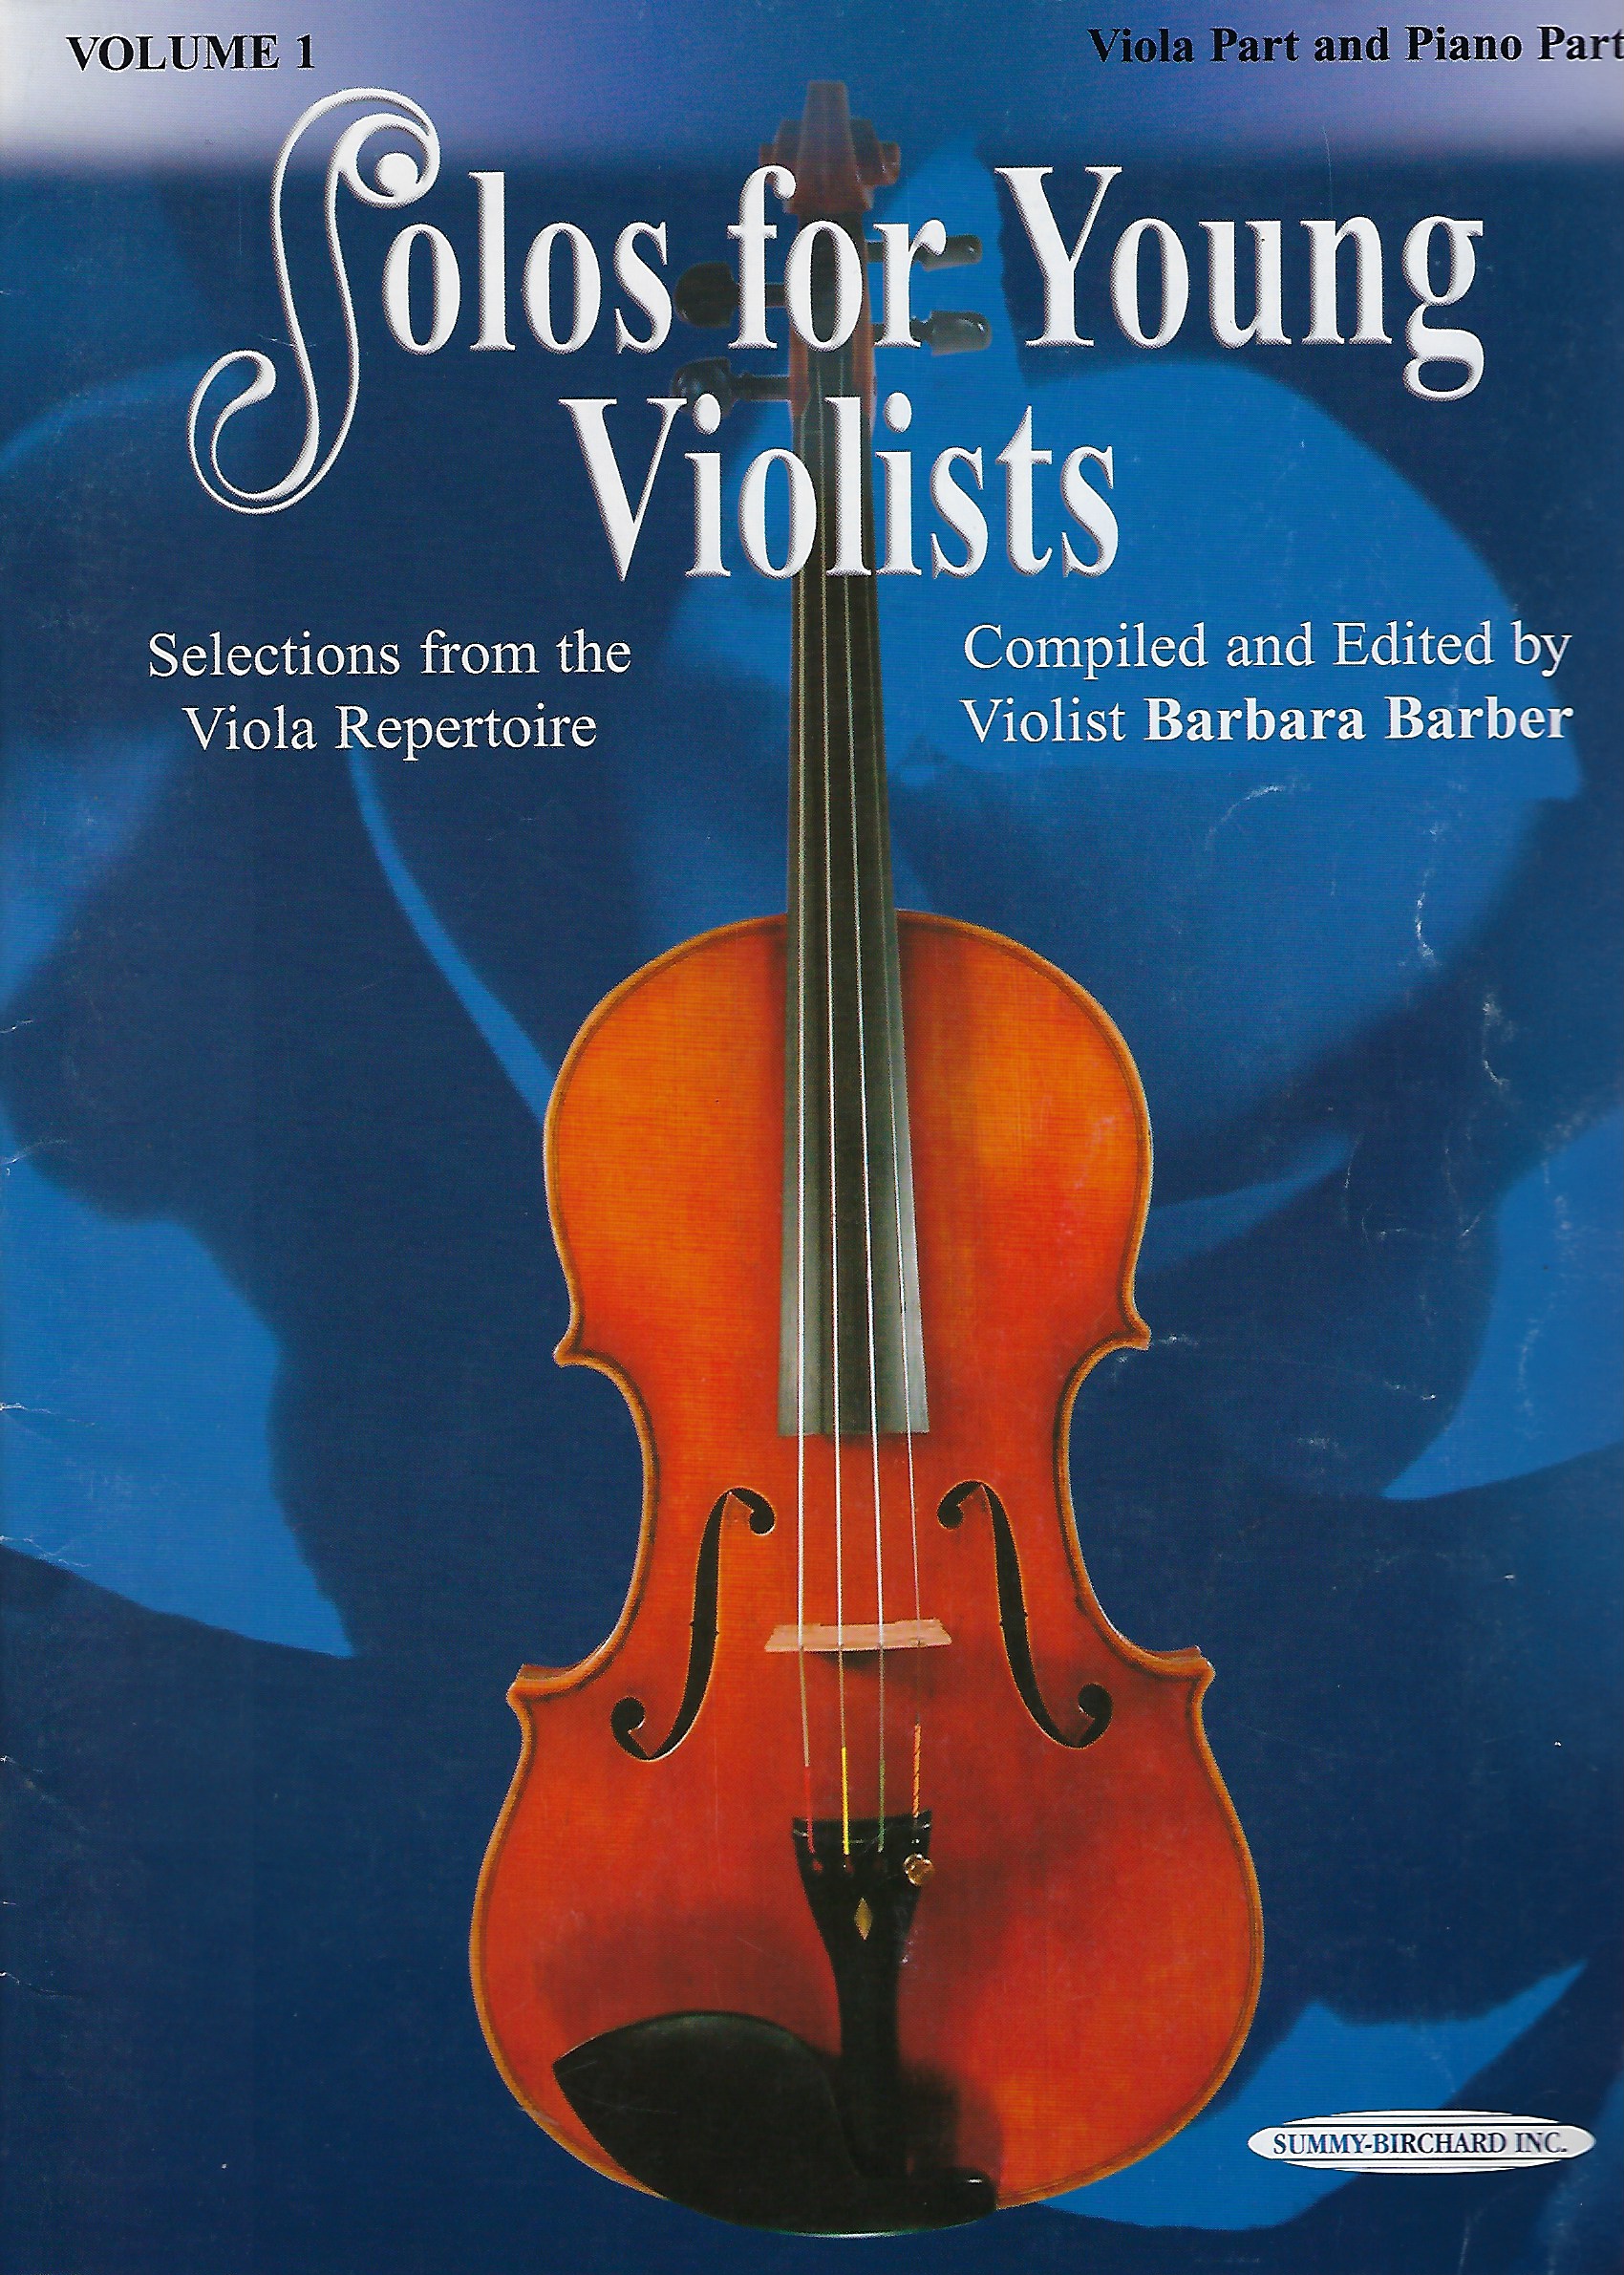 Solos for young violists vol. 1